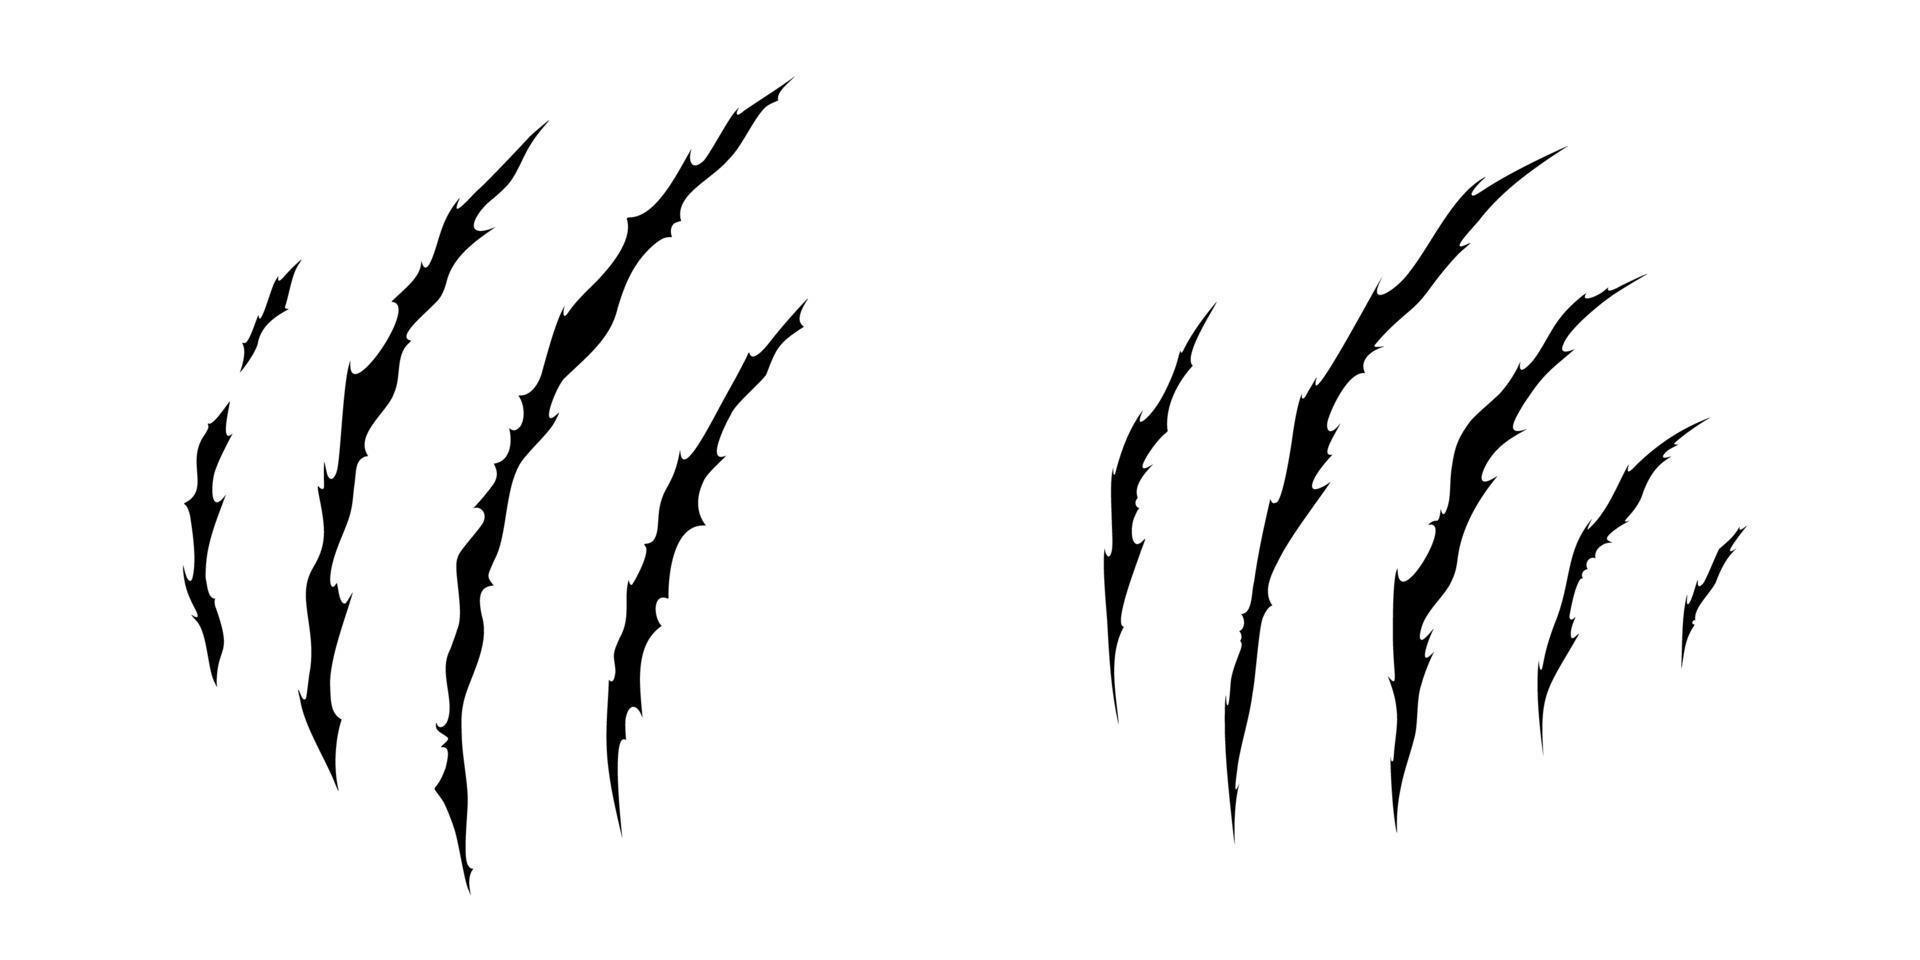 Claw scratches of wild animal. Set with cat scratches marks isolated in white background. Vector illustration